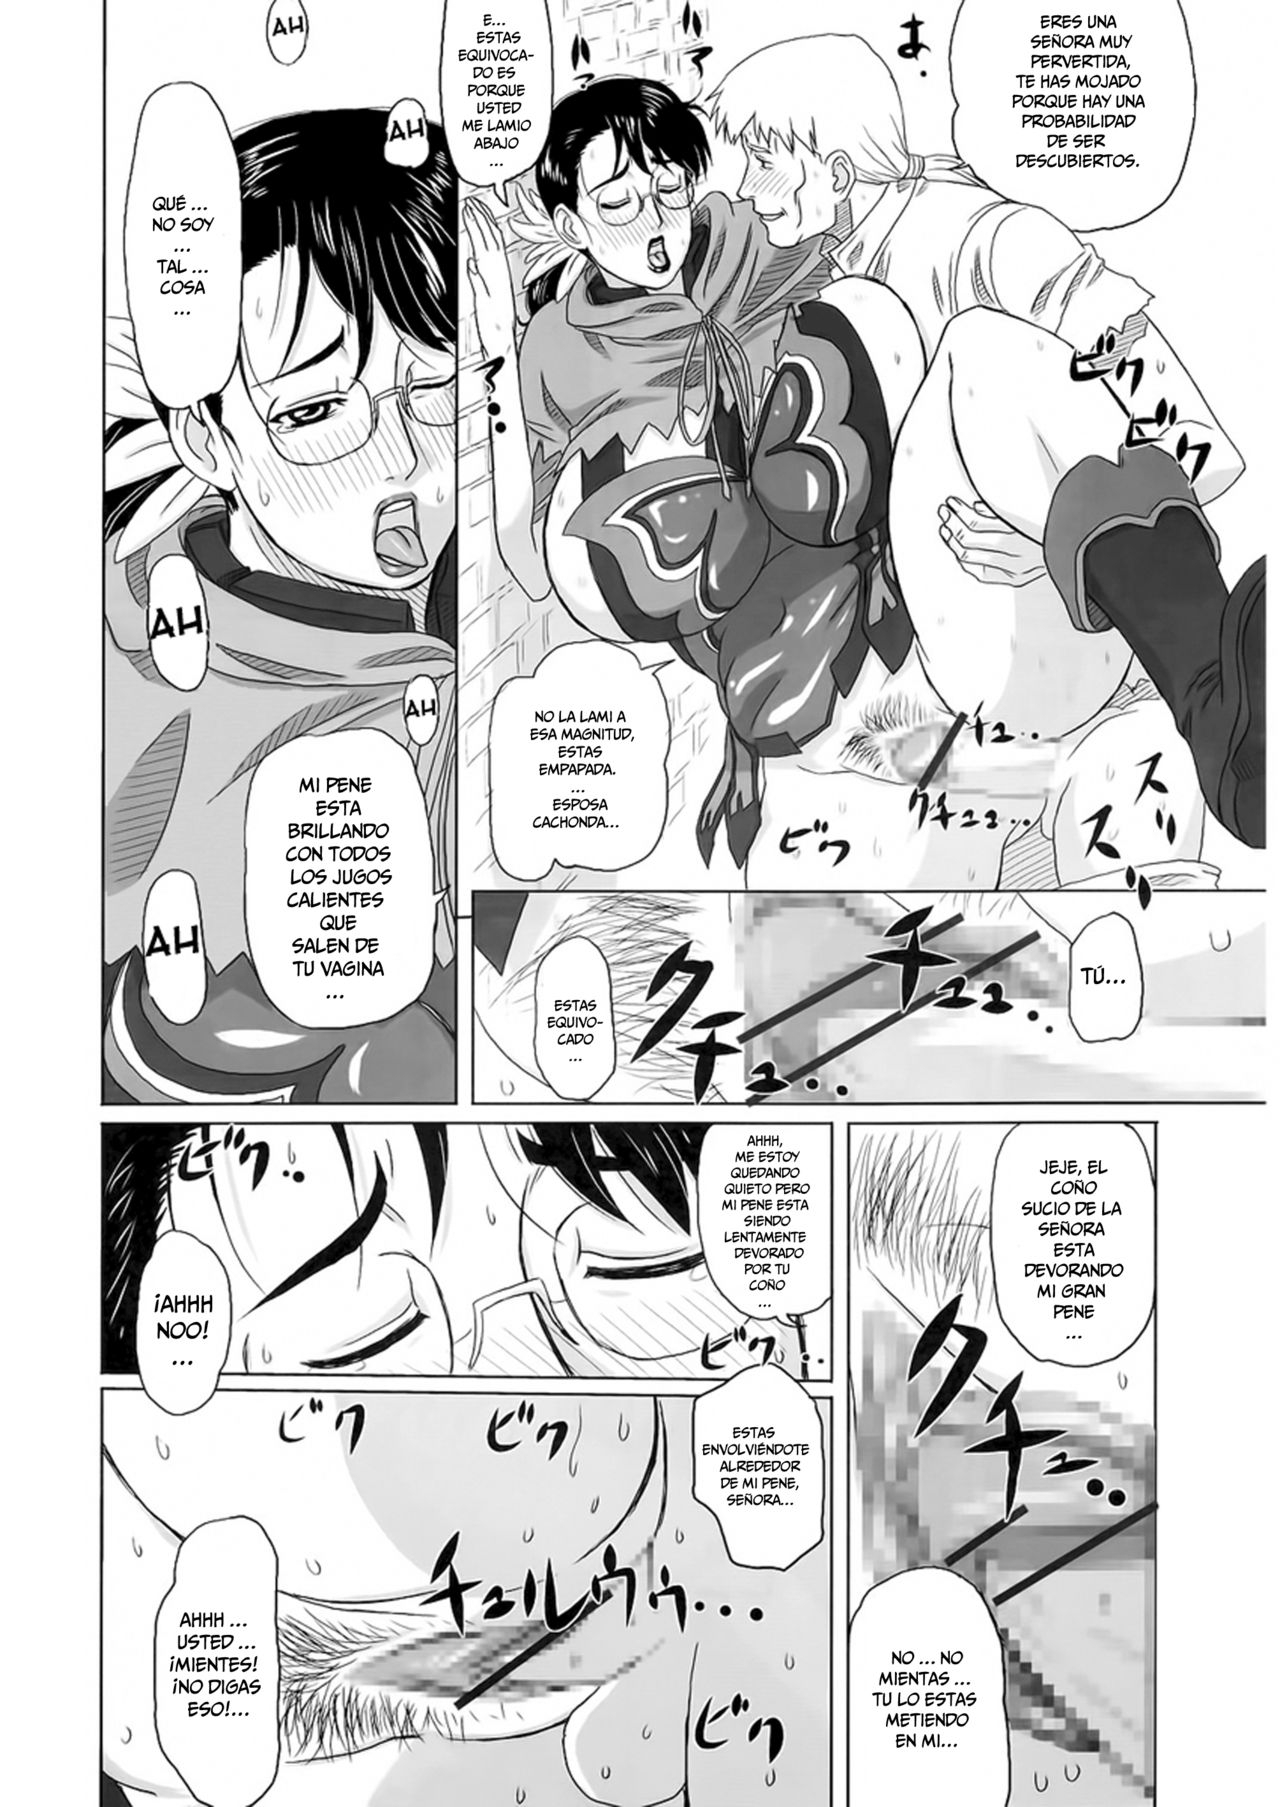 (C73) [Shiawase Pullin Dou (Ninroku)] Package-Meat 2 (Queen's Blade) [Spanish] [Abstractosis] 6